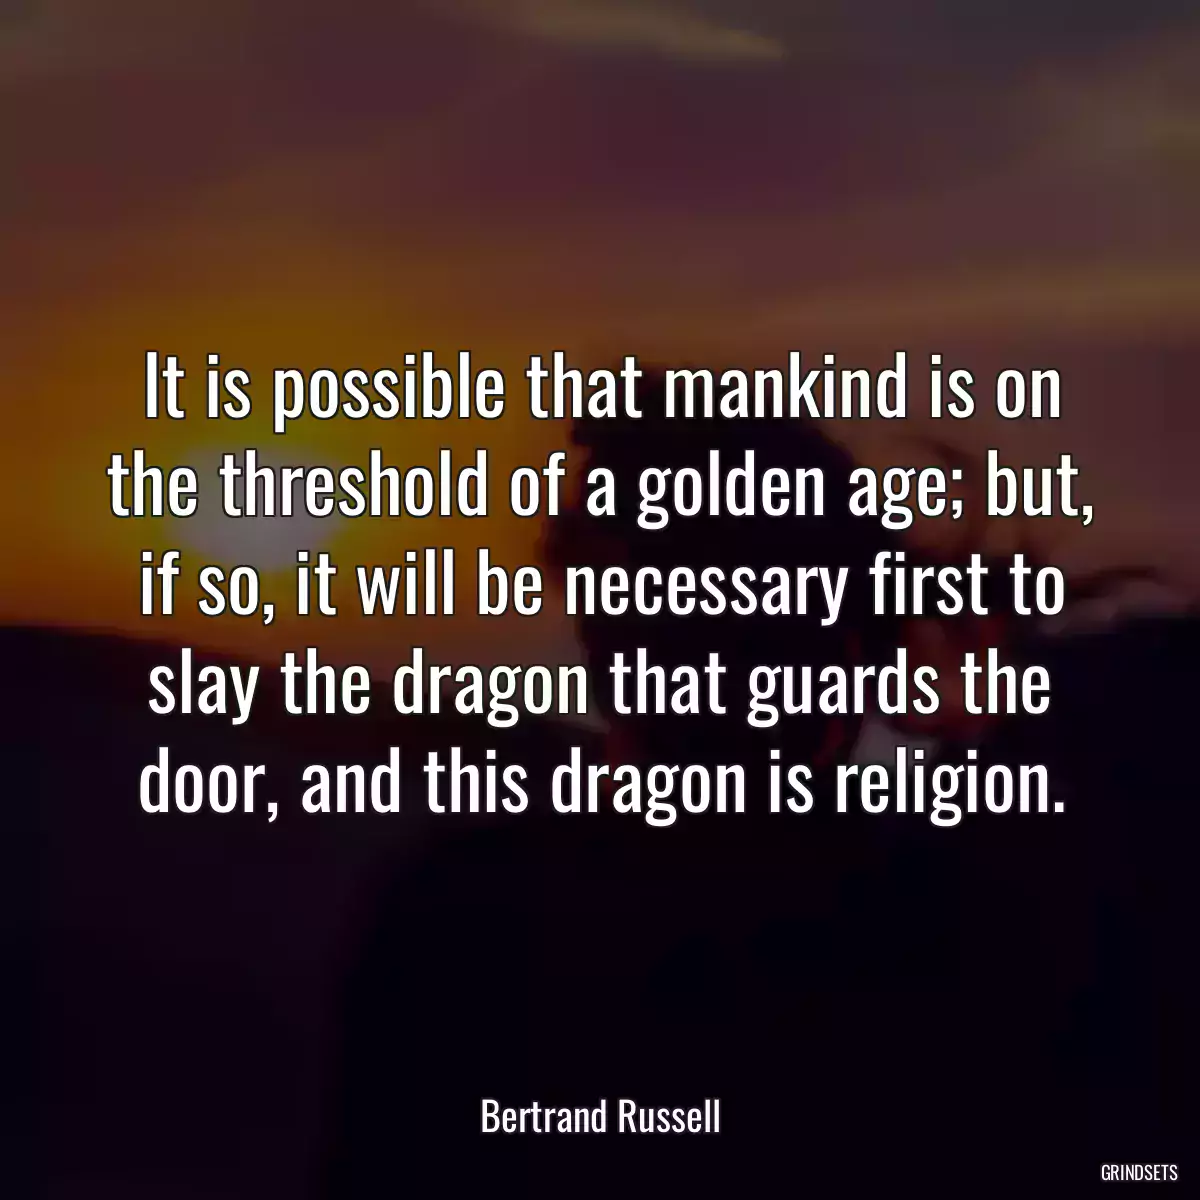 It is possible that mankind is on the threshold of a golden age; but, if so, it will be necessary first to slay the dragon that guards the door, and this dragon is religion.